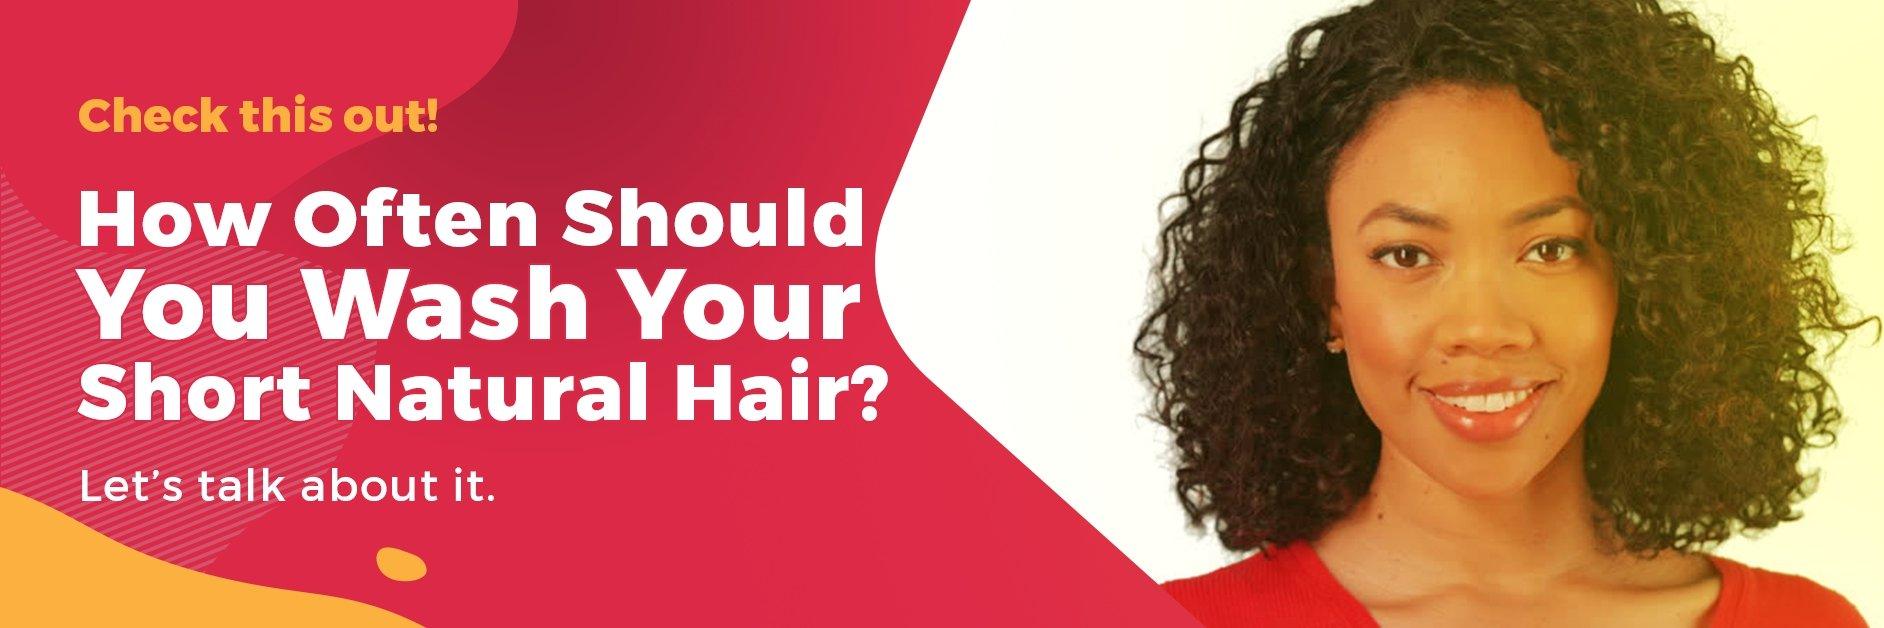 How Often Should You Wash Your Short Natural Hair? - GlammedNaturallyOil